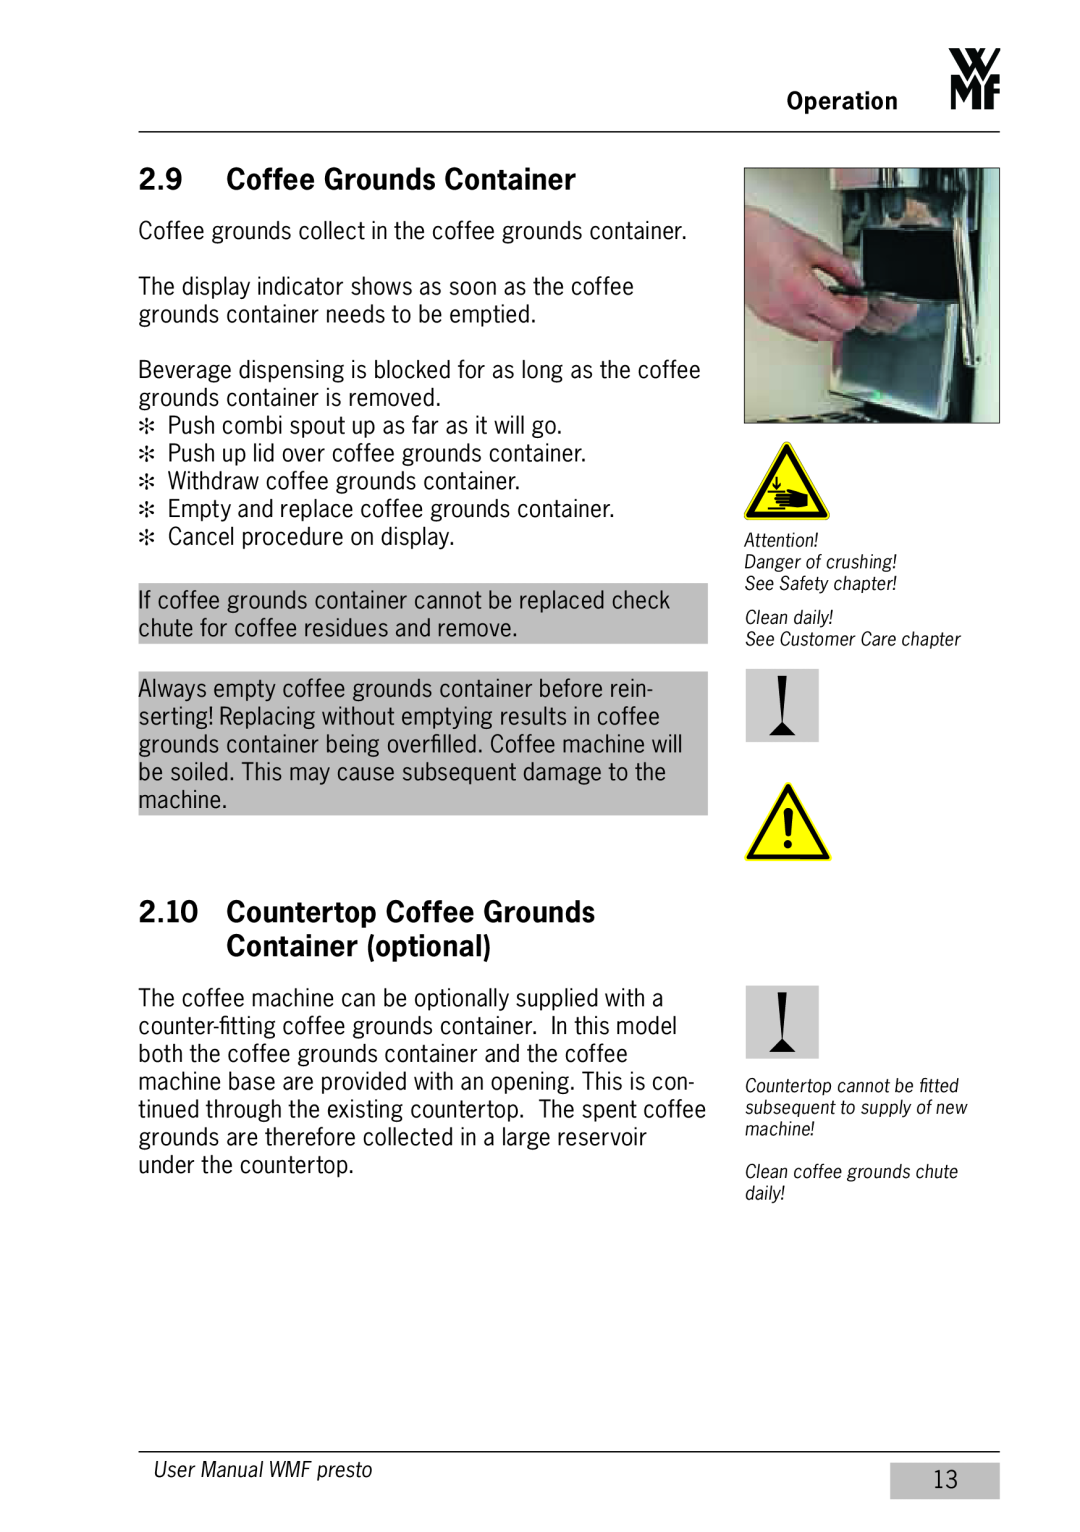 WMF Americas 1400 user manual Countertop Coffee Grounds Container optional, Operation 